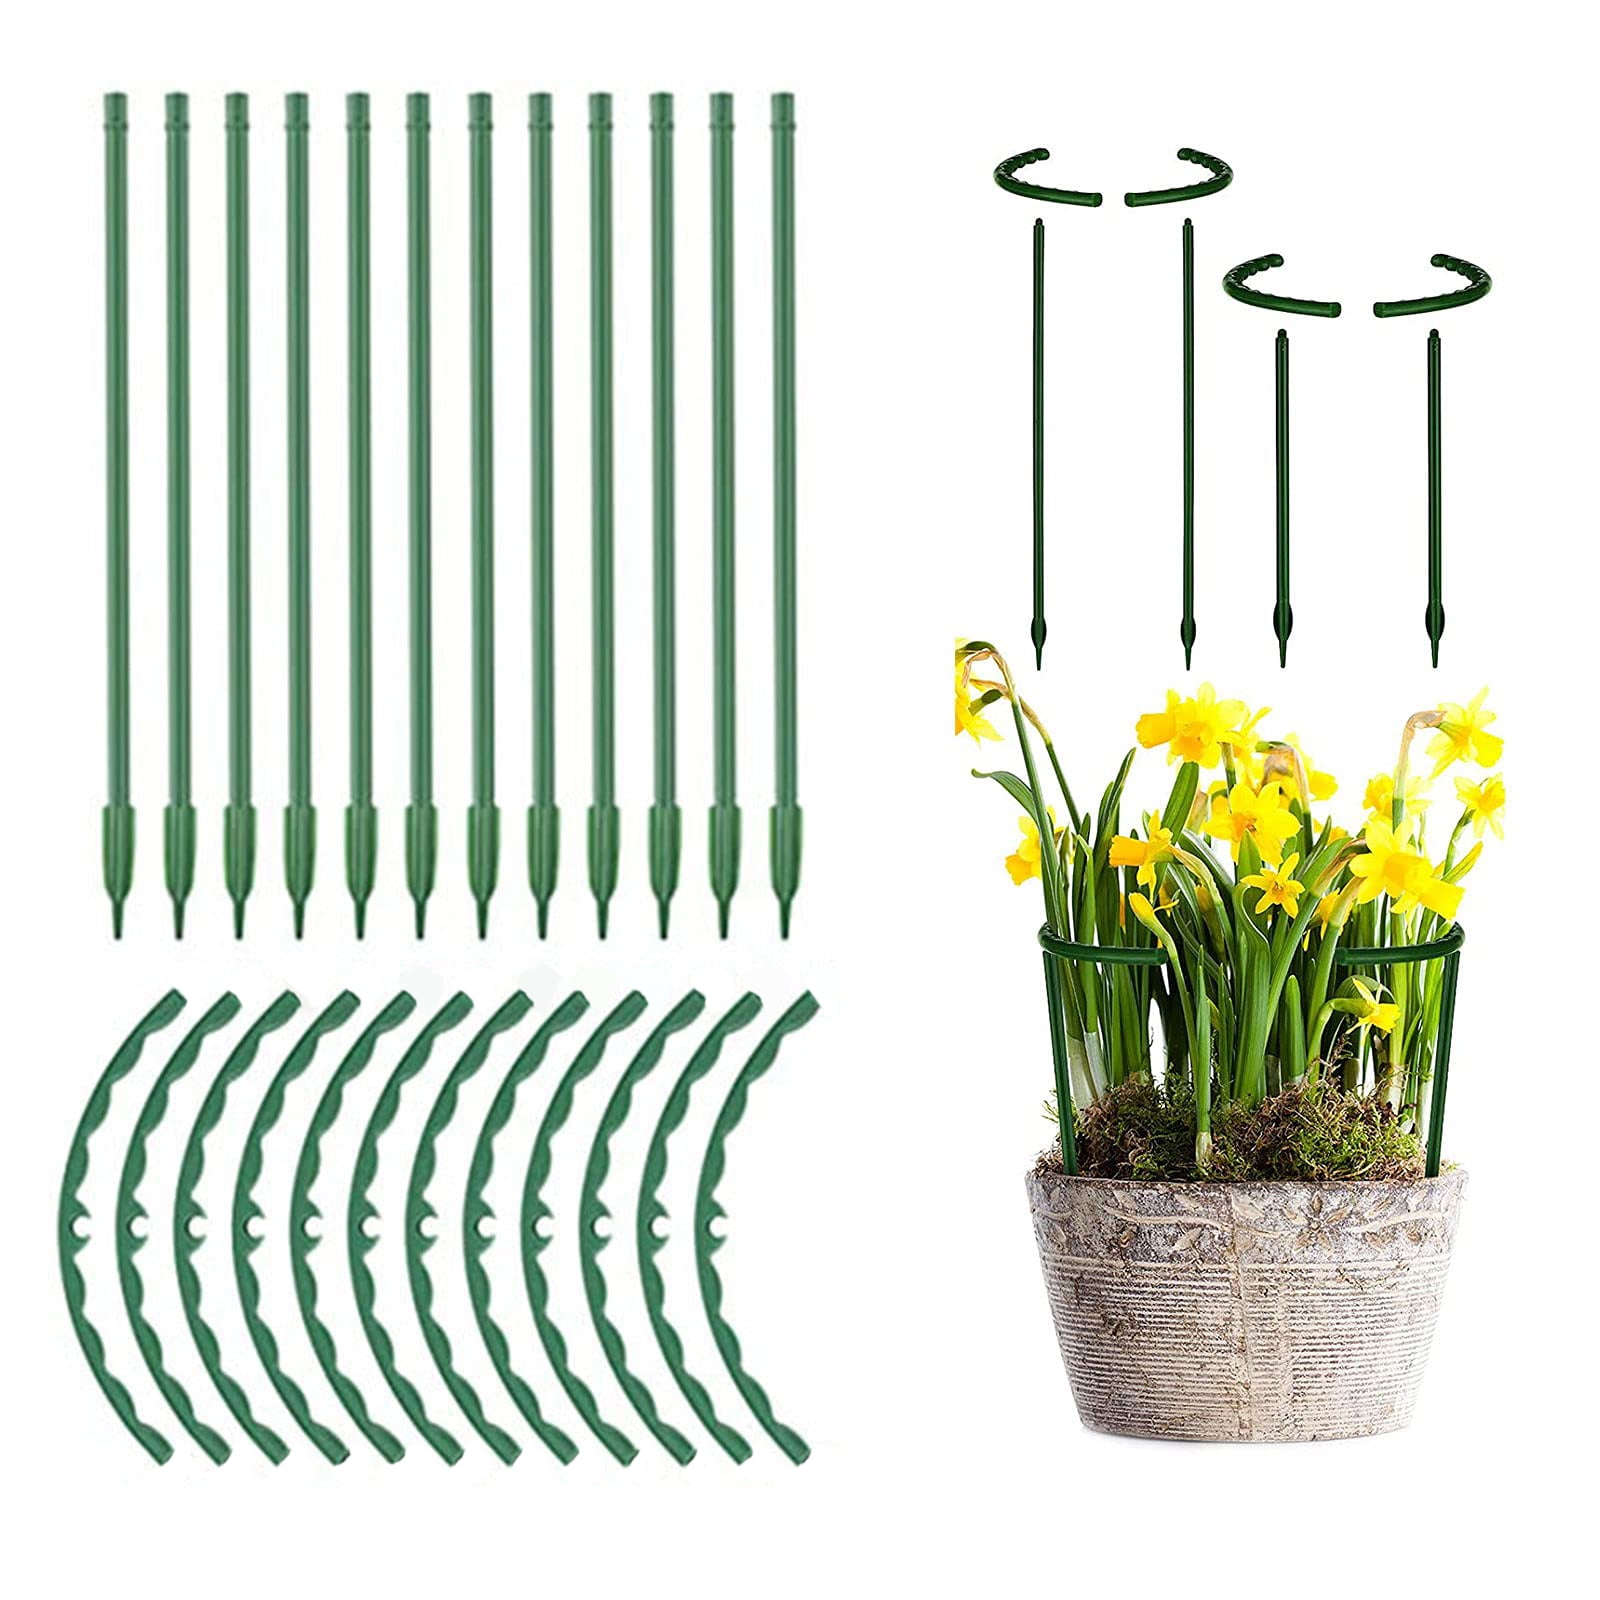 Vine Rose Metal Half Round Plant Stake Ring for Tomato Tomato Cages for Garden Flower Tomato Stakes and Support 12-pack Plant Cages and Supports for Outdoor plants with 20 Pcs Plant Support Clips 